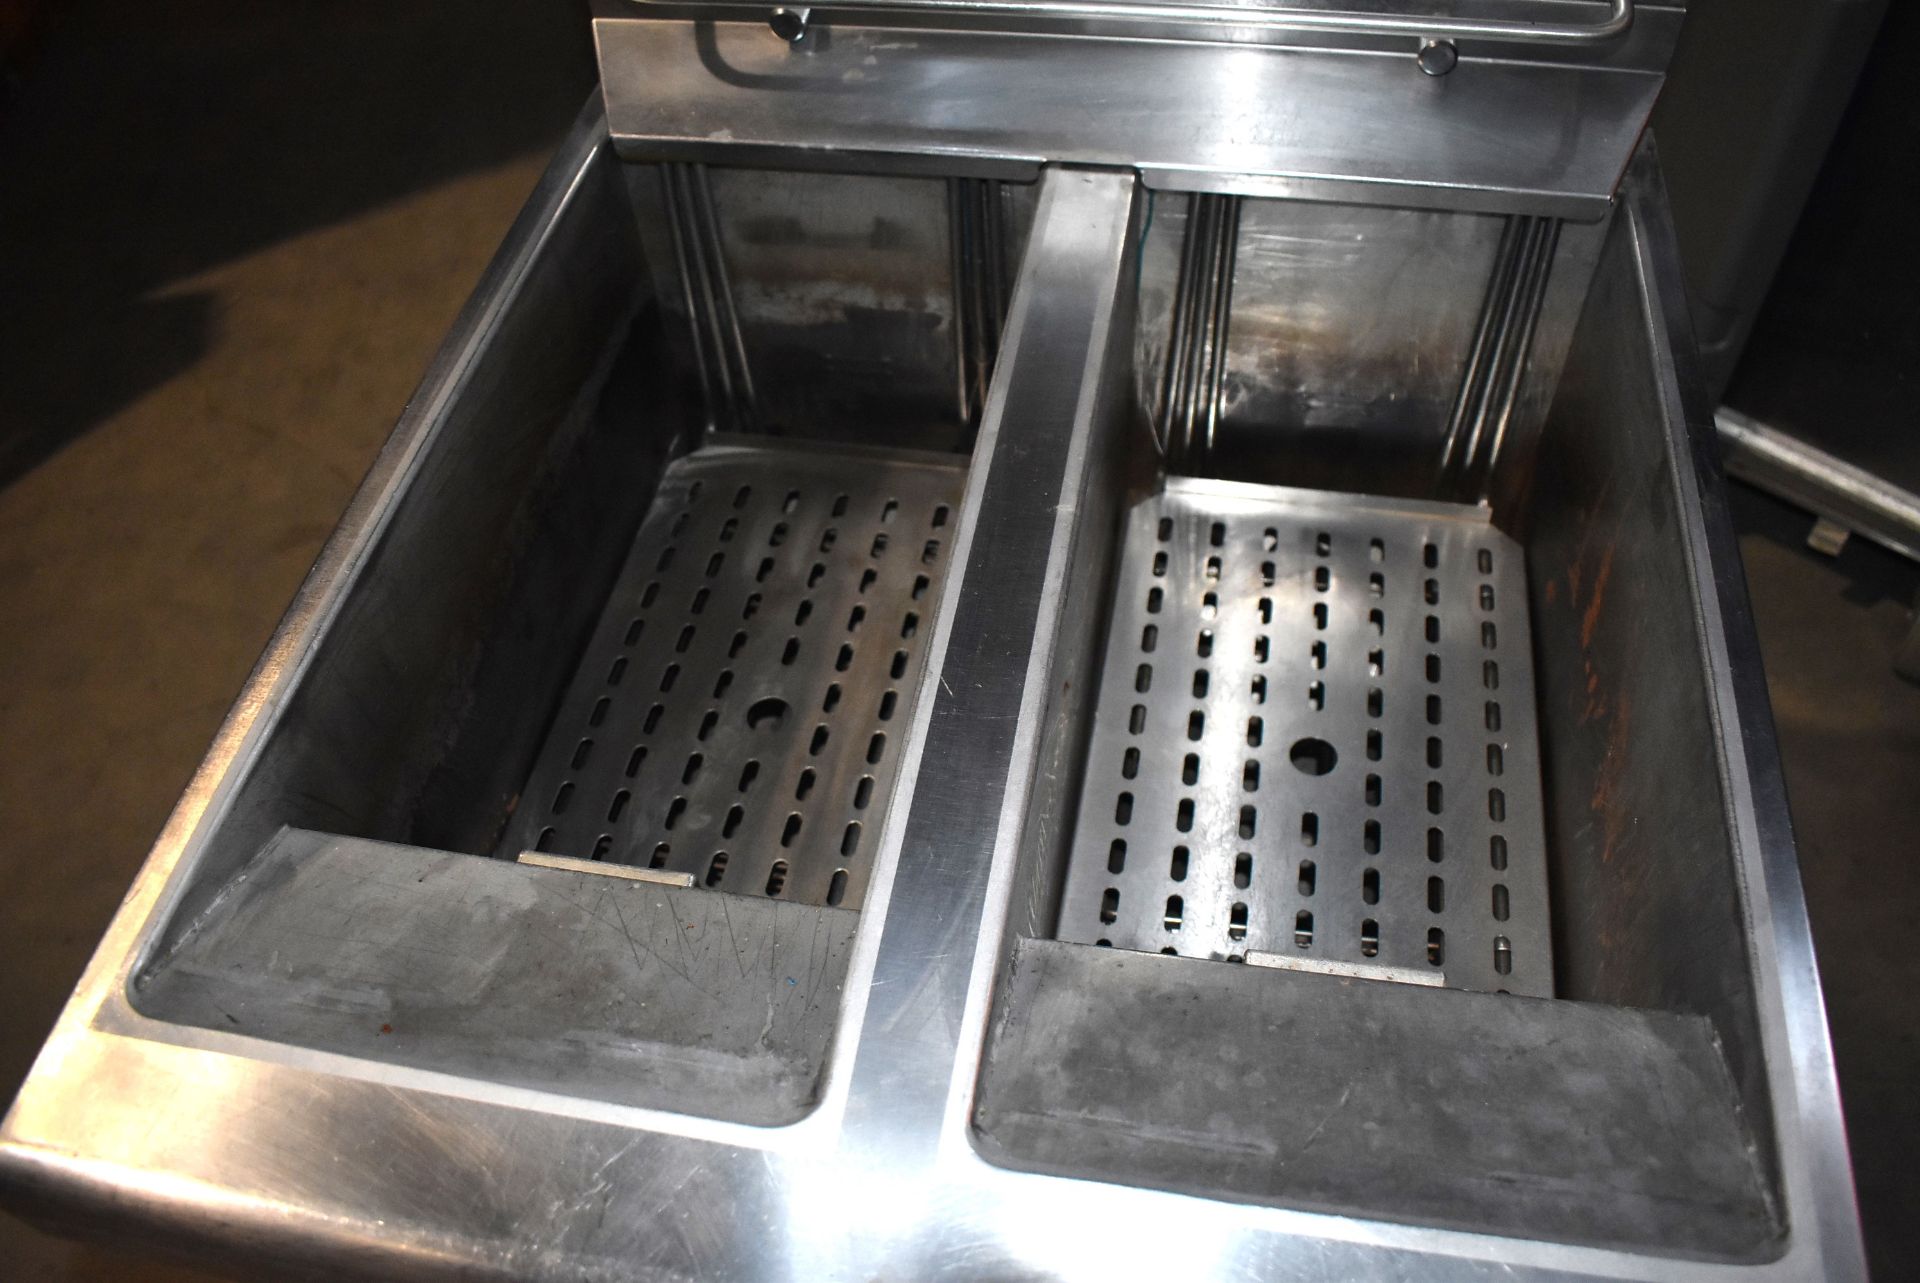 1 x Lincat Opus 700 Twin Tank Commercial Fryer - 3 Phase - Original RRP £3,700 - Recently Removed - Image 6 of 8